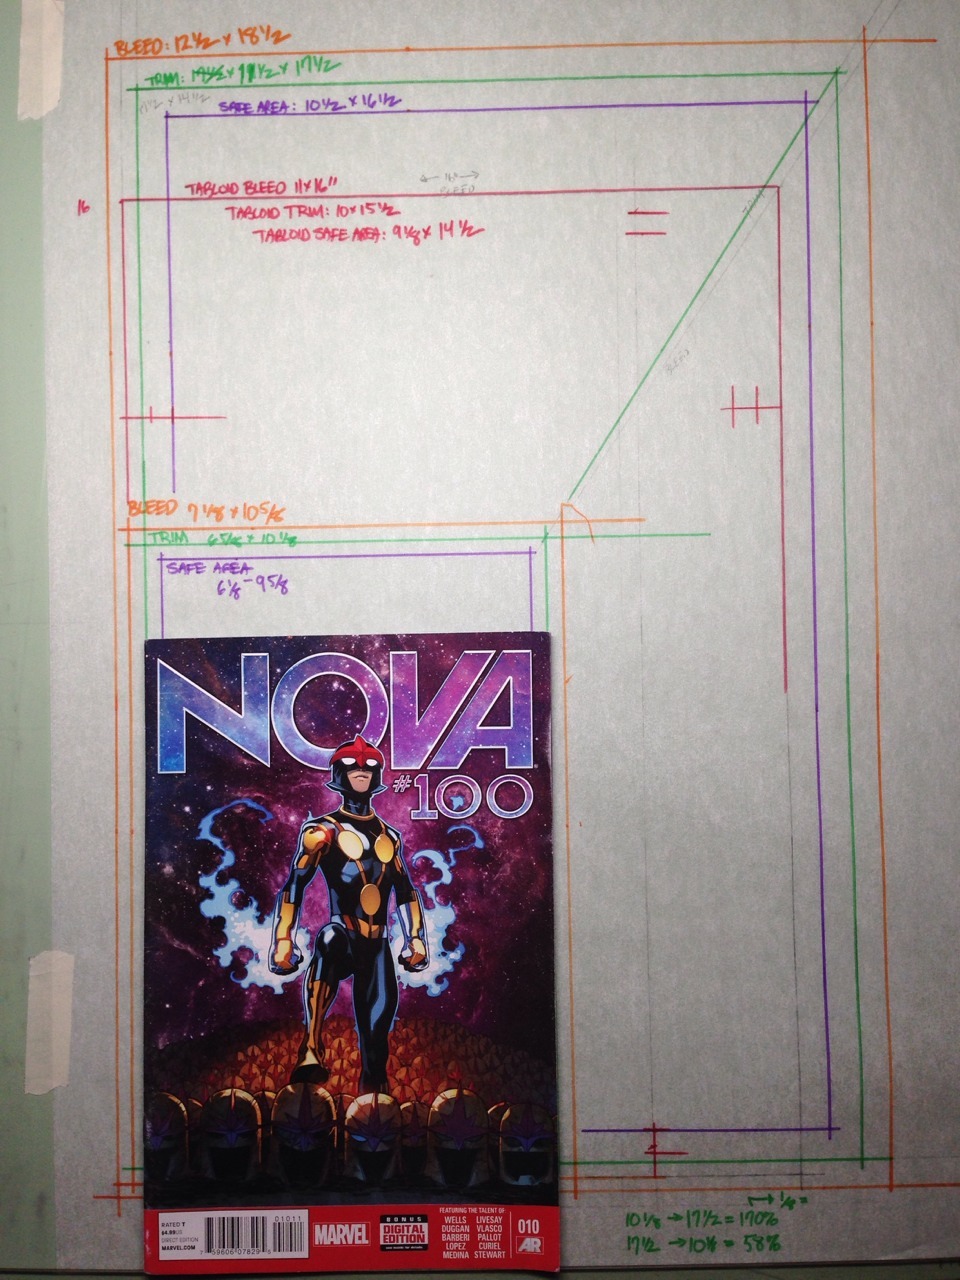 scaled production template for comic book art